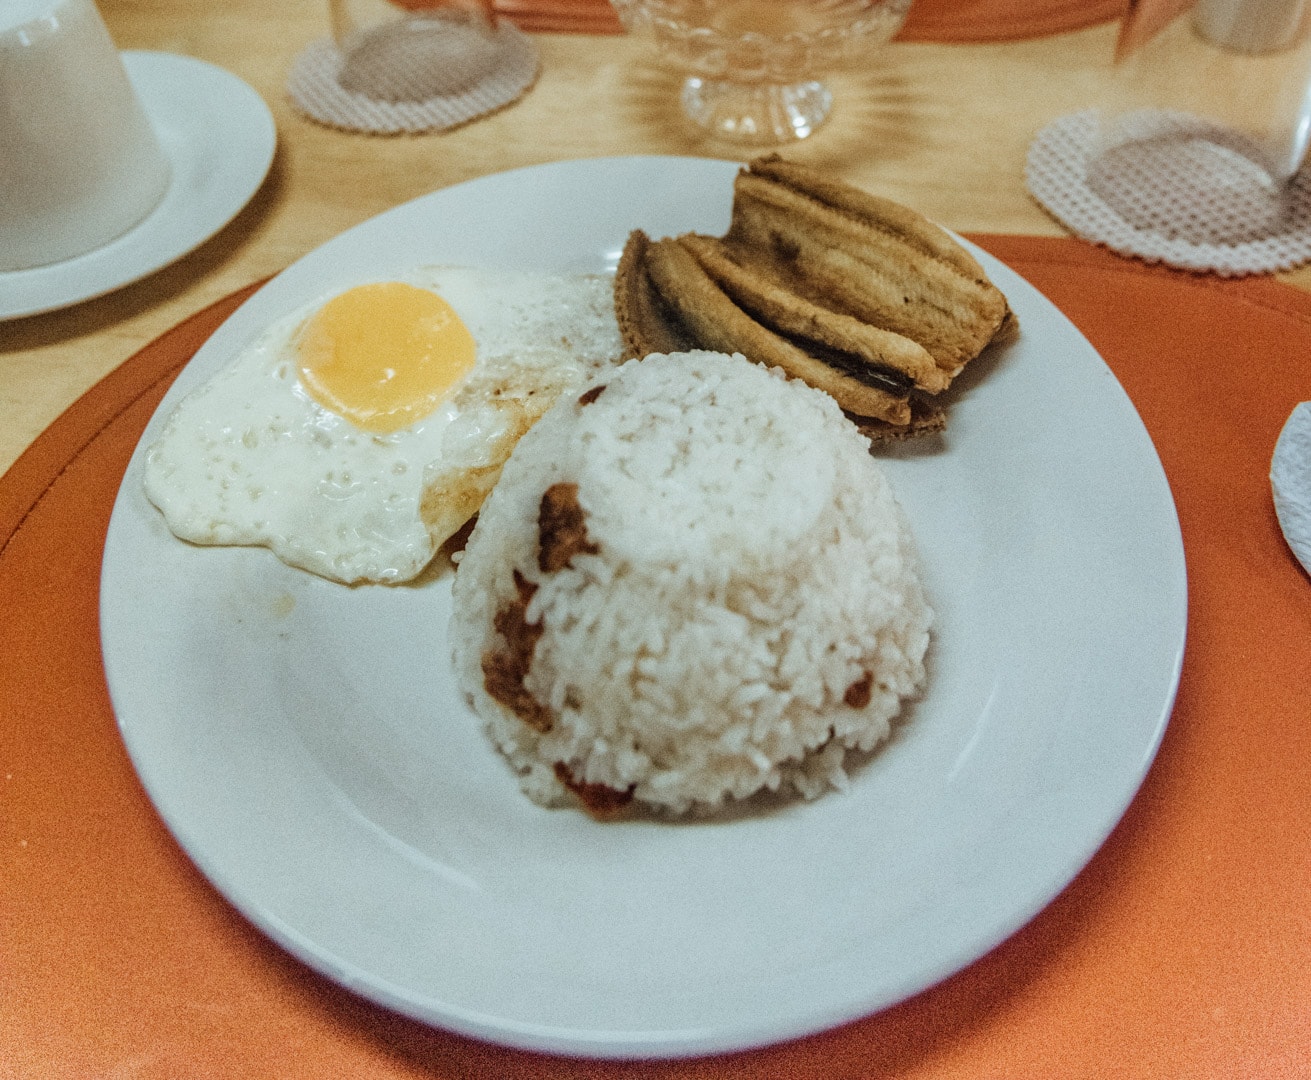 batanes food, where to eat in Batanes, Hiro's Cafe